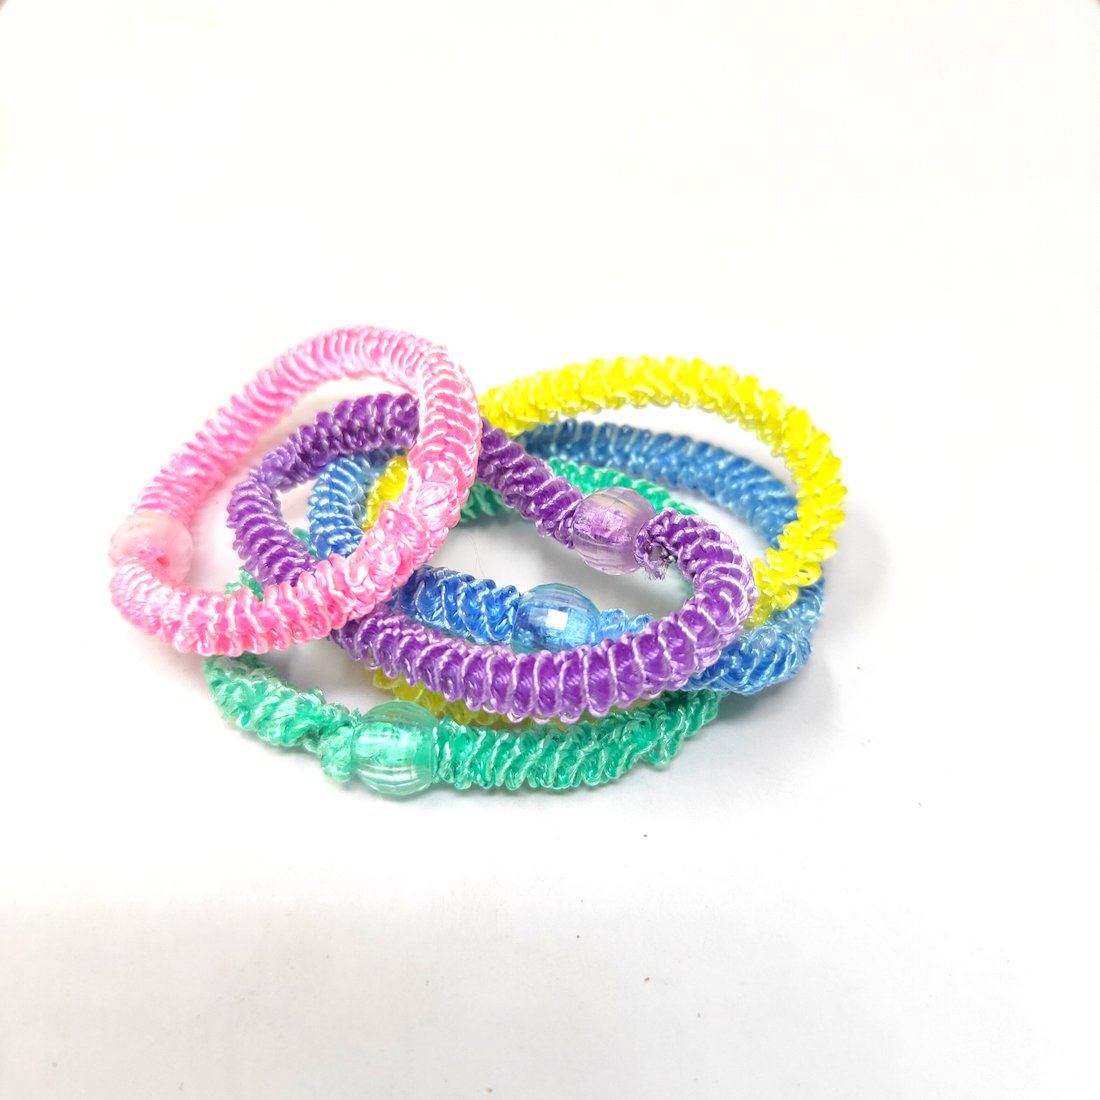 Anokhi Ada small size Elastic Rubber for Girls and Women (15-27b, Ponytail Holders, 5 Pcs Assorted Colour Rubber)